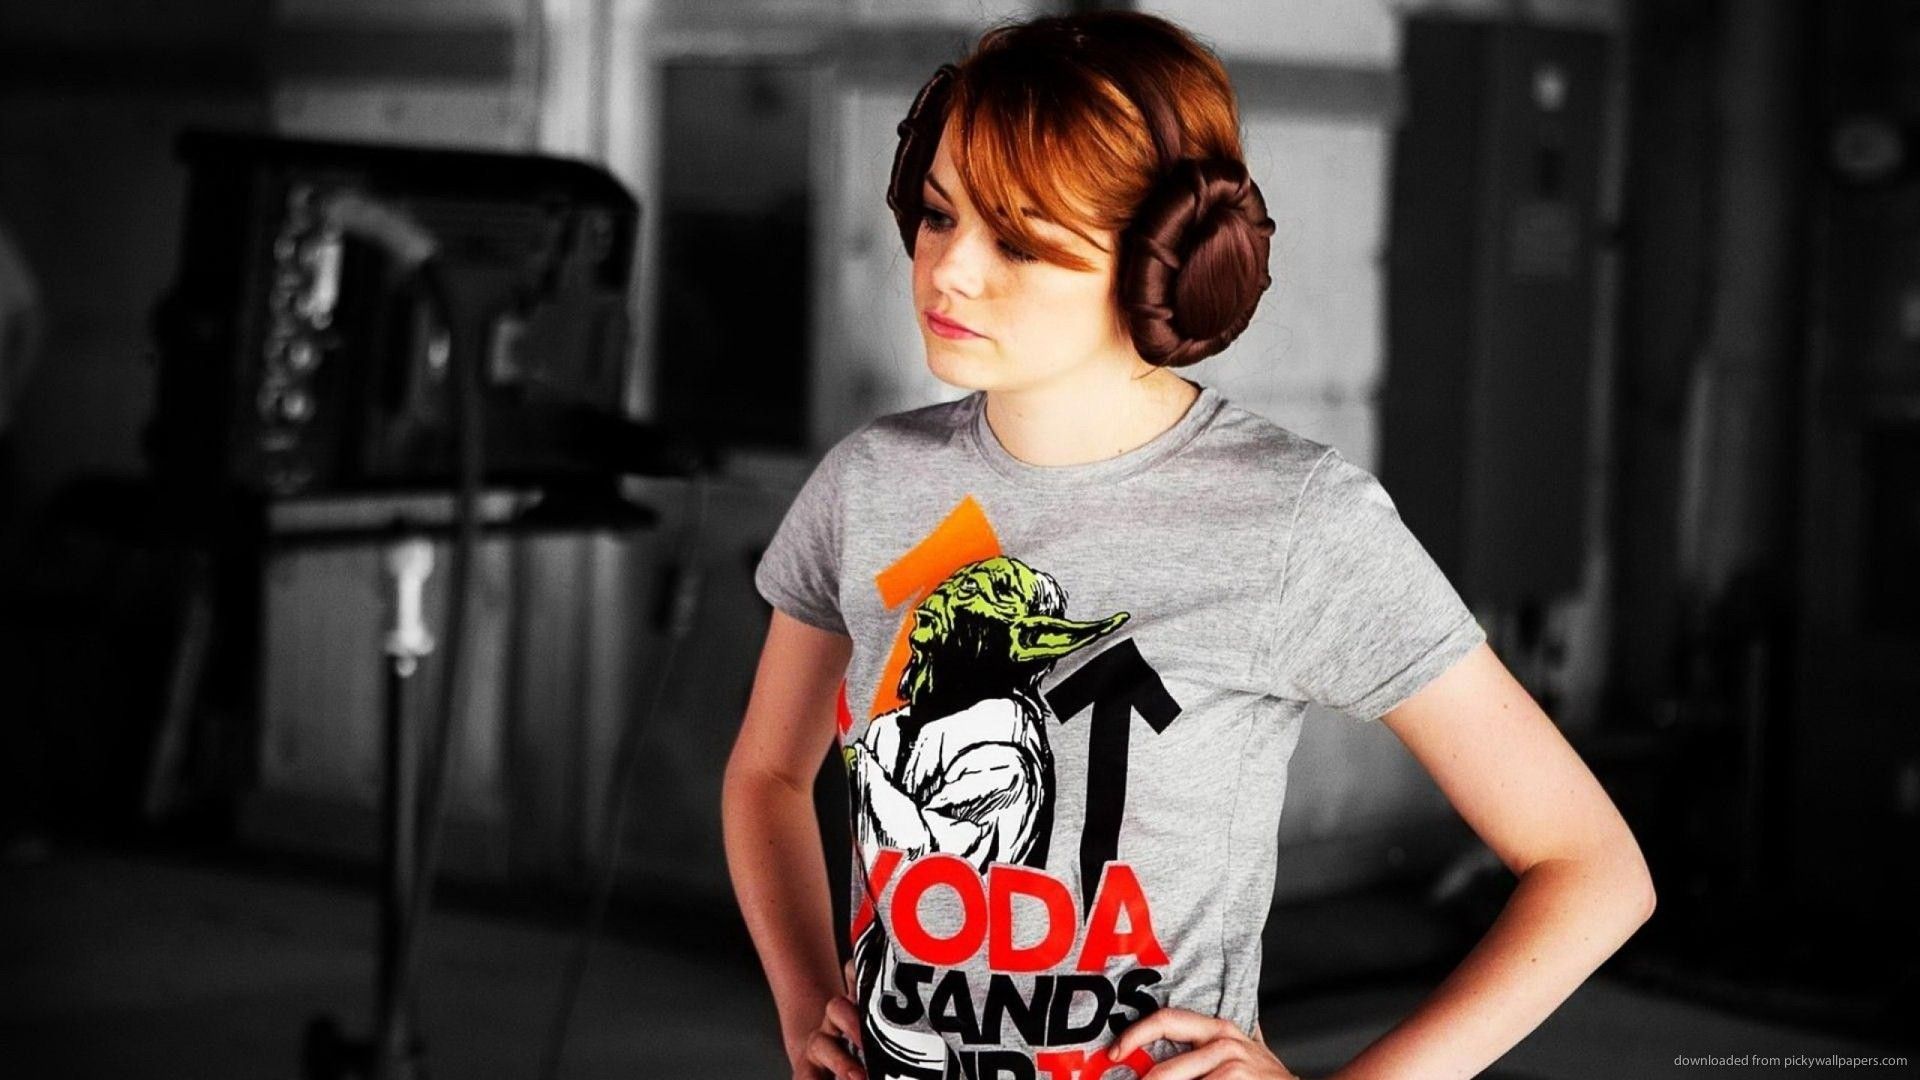 Download 1920x1080 Emma Stone With Princess Leia Hairstyle Wallpaper